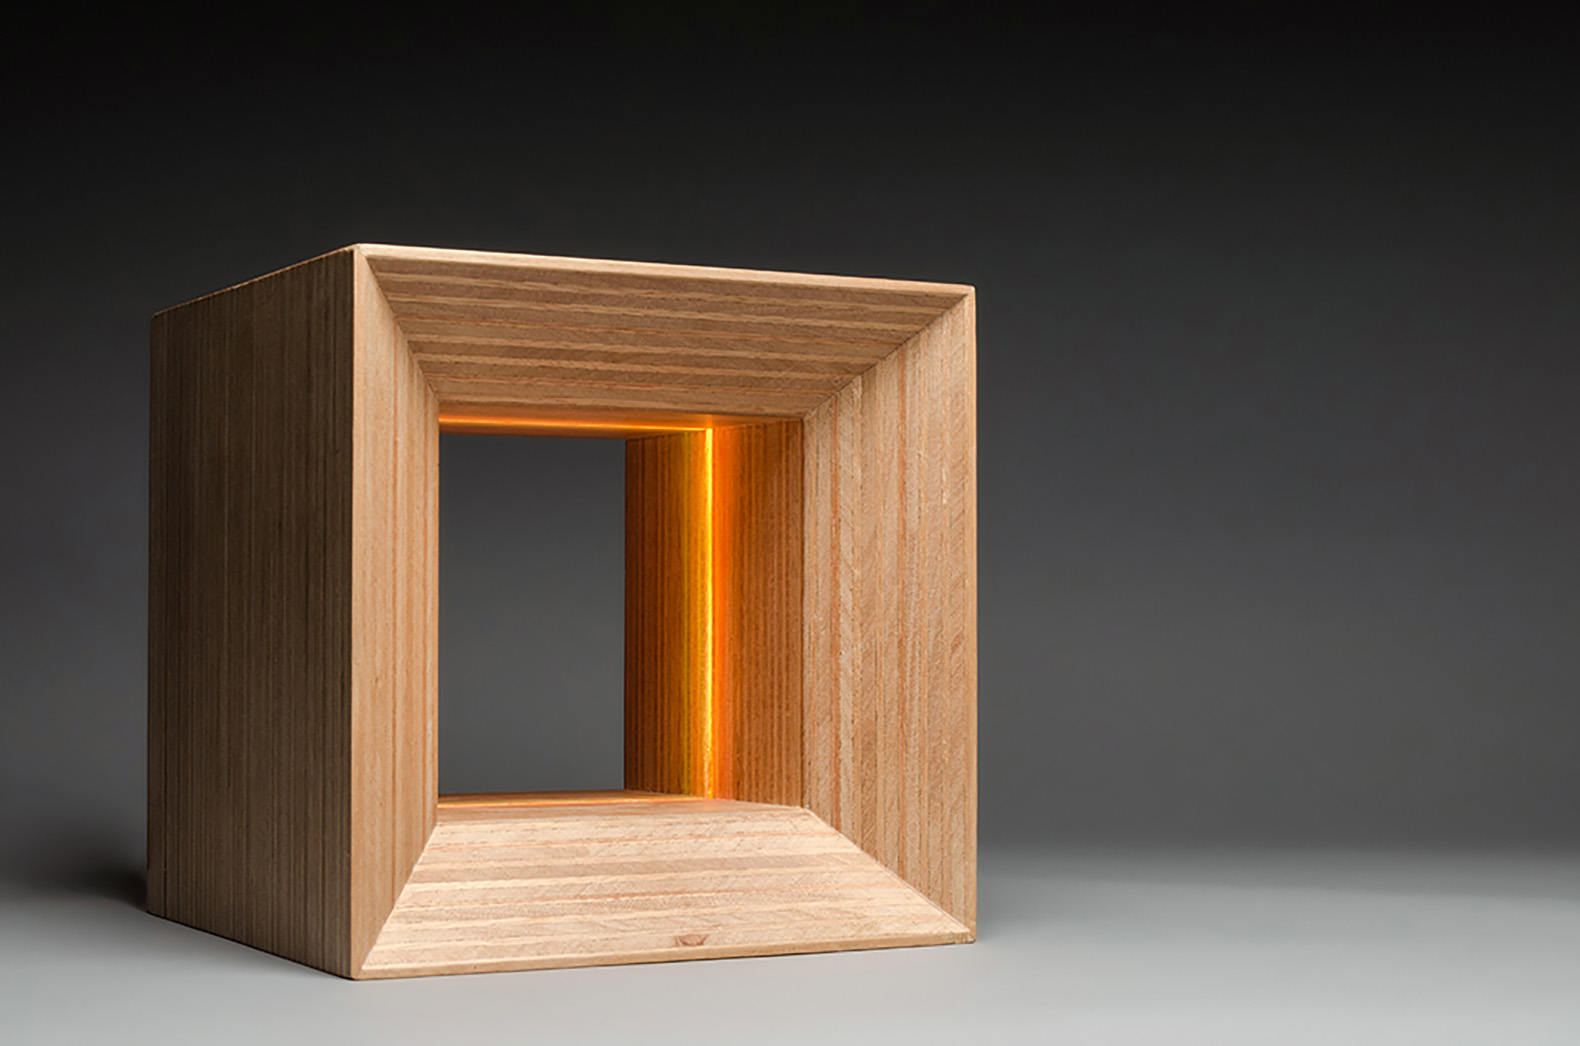 wood lamps designs lux3 is a color-changing wooden lamp that boosts your mood and health ADMFWCY